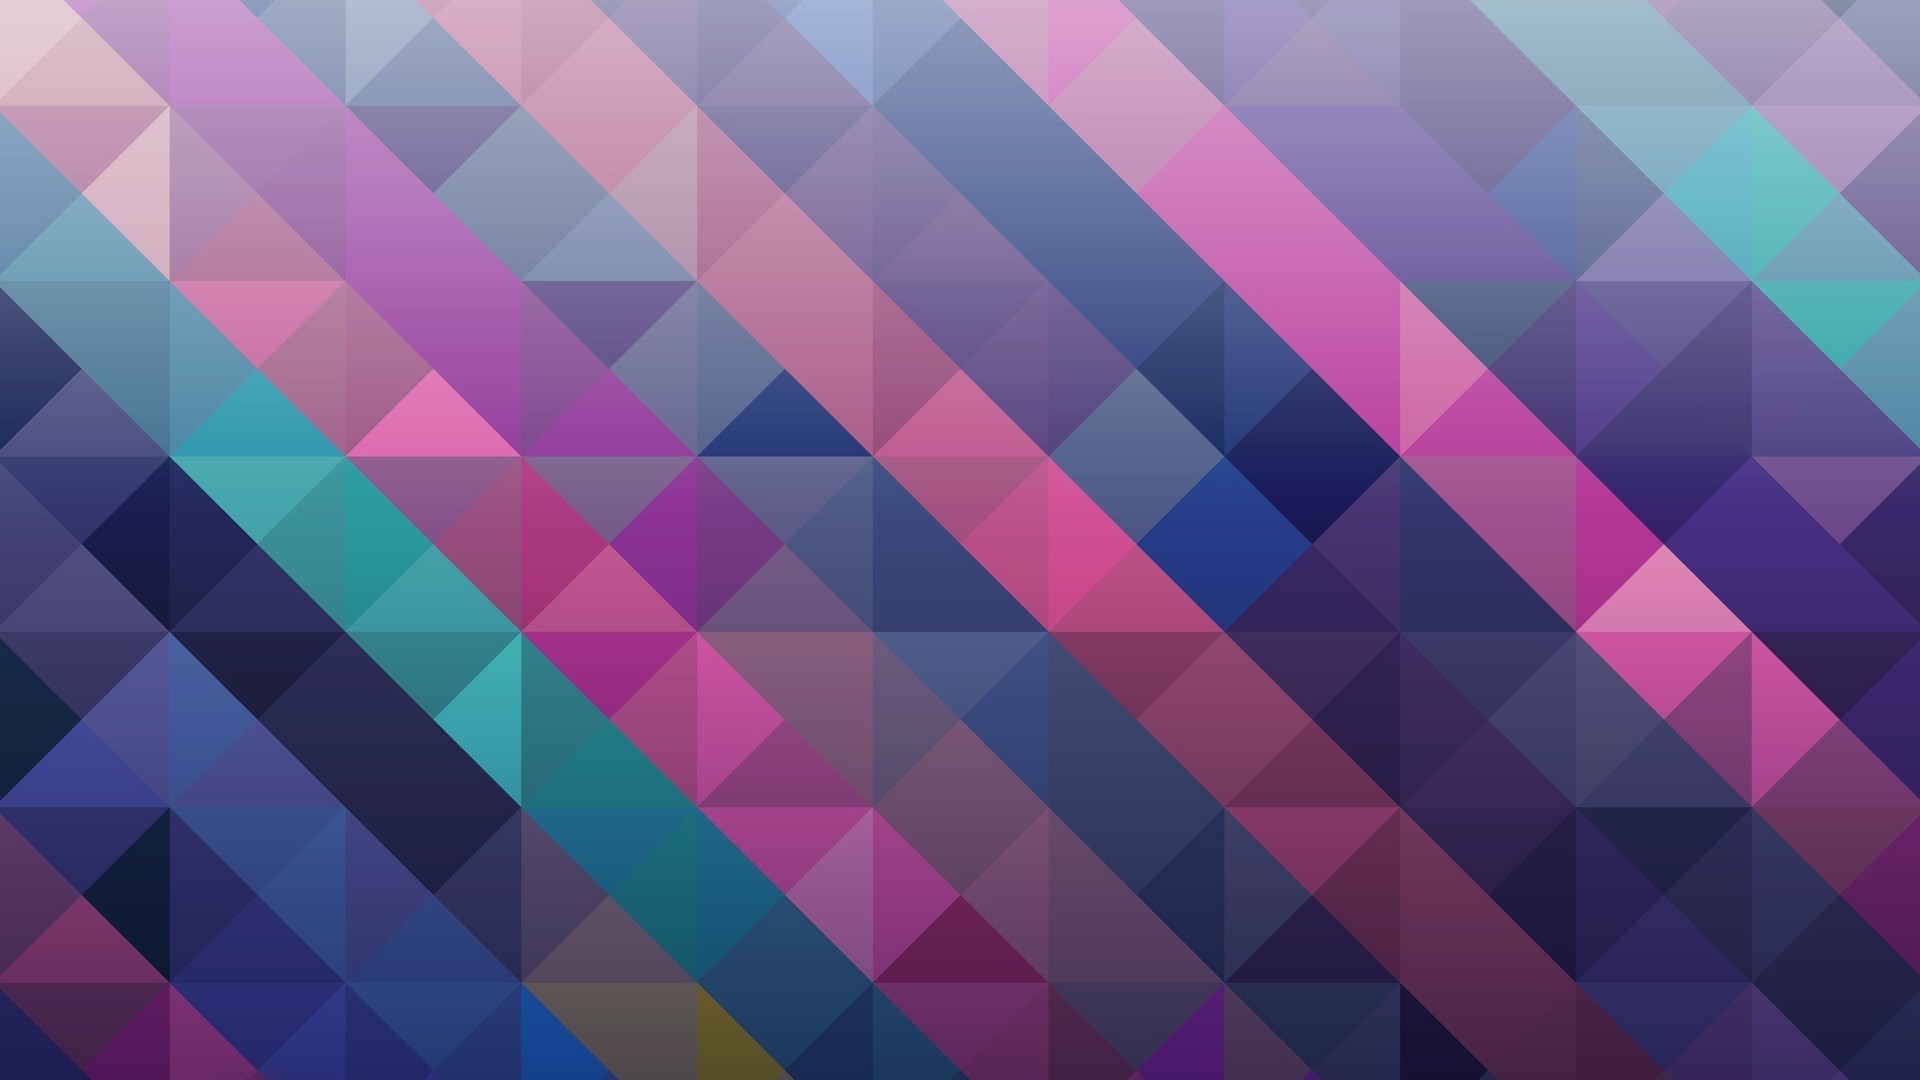 1920x1080 abstract mosaic pattern geometric colorful wallpapers triangle minimalism square digital lines geometry background purple texture minimalist computer resolution desktop 1080